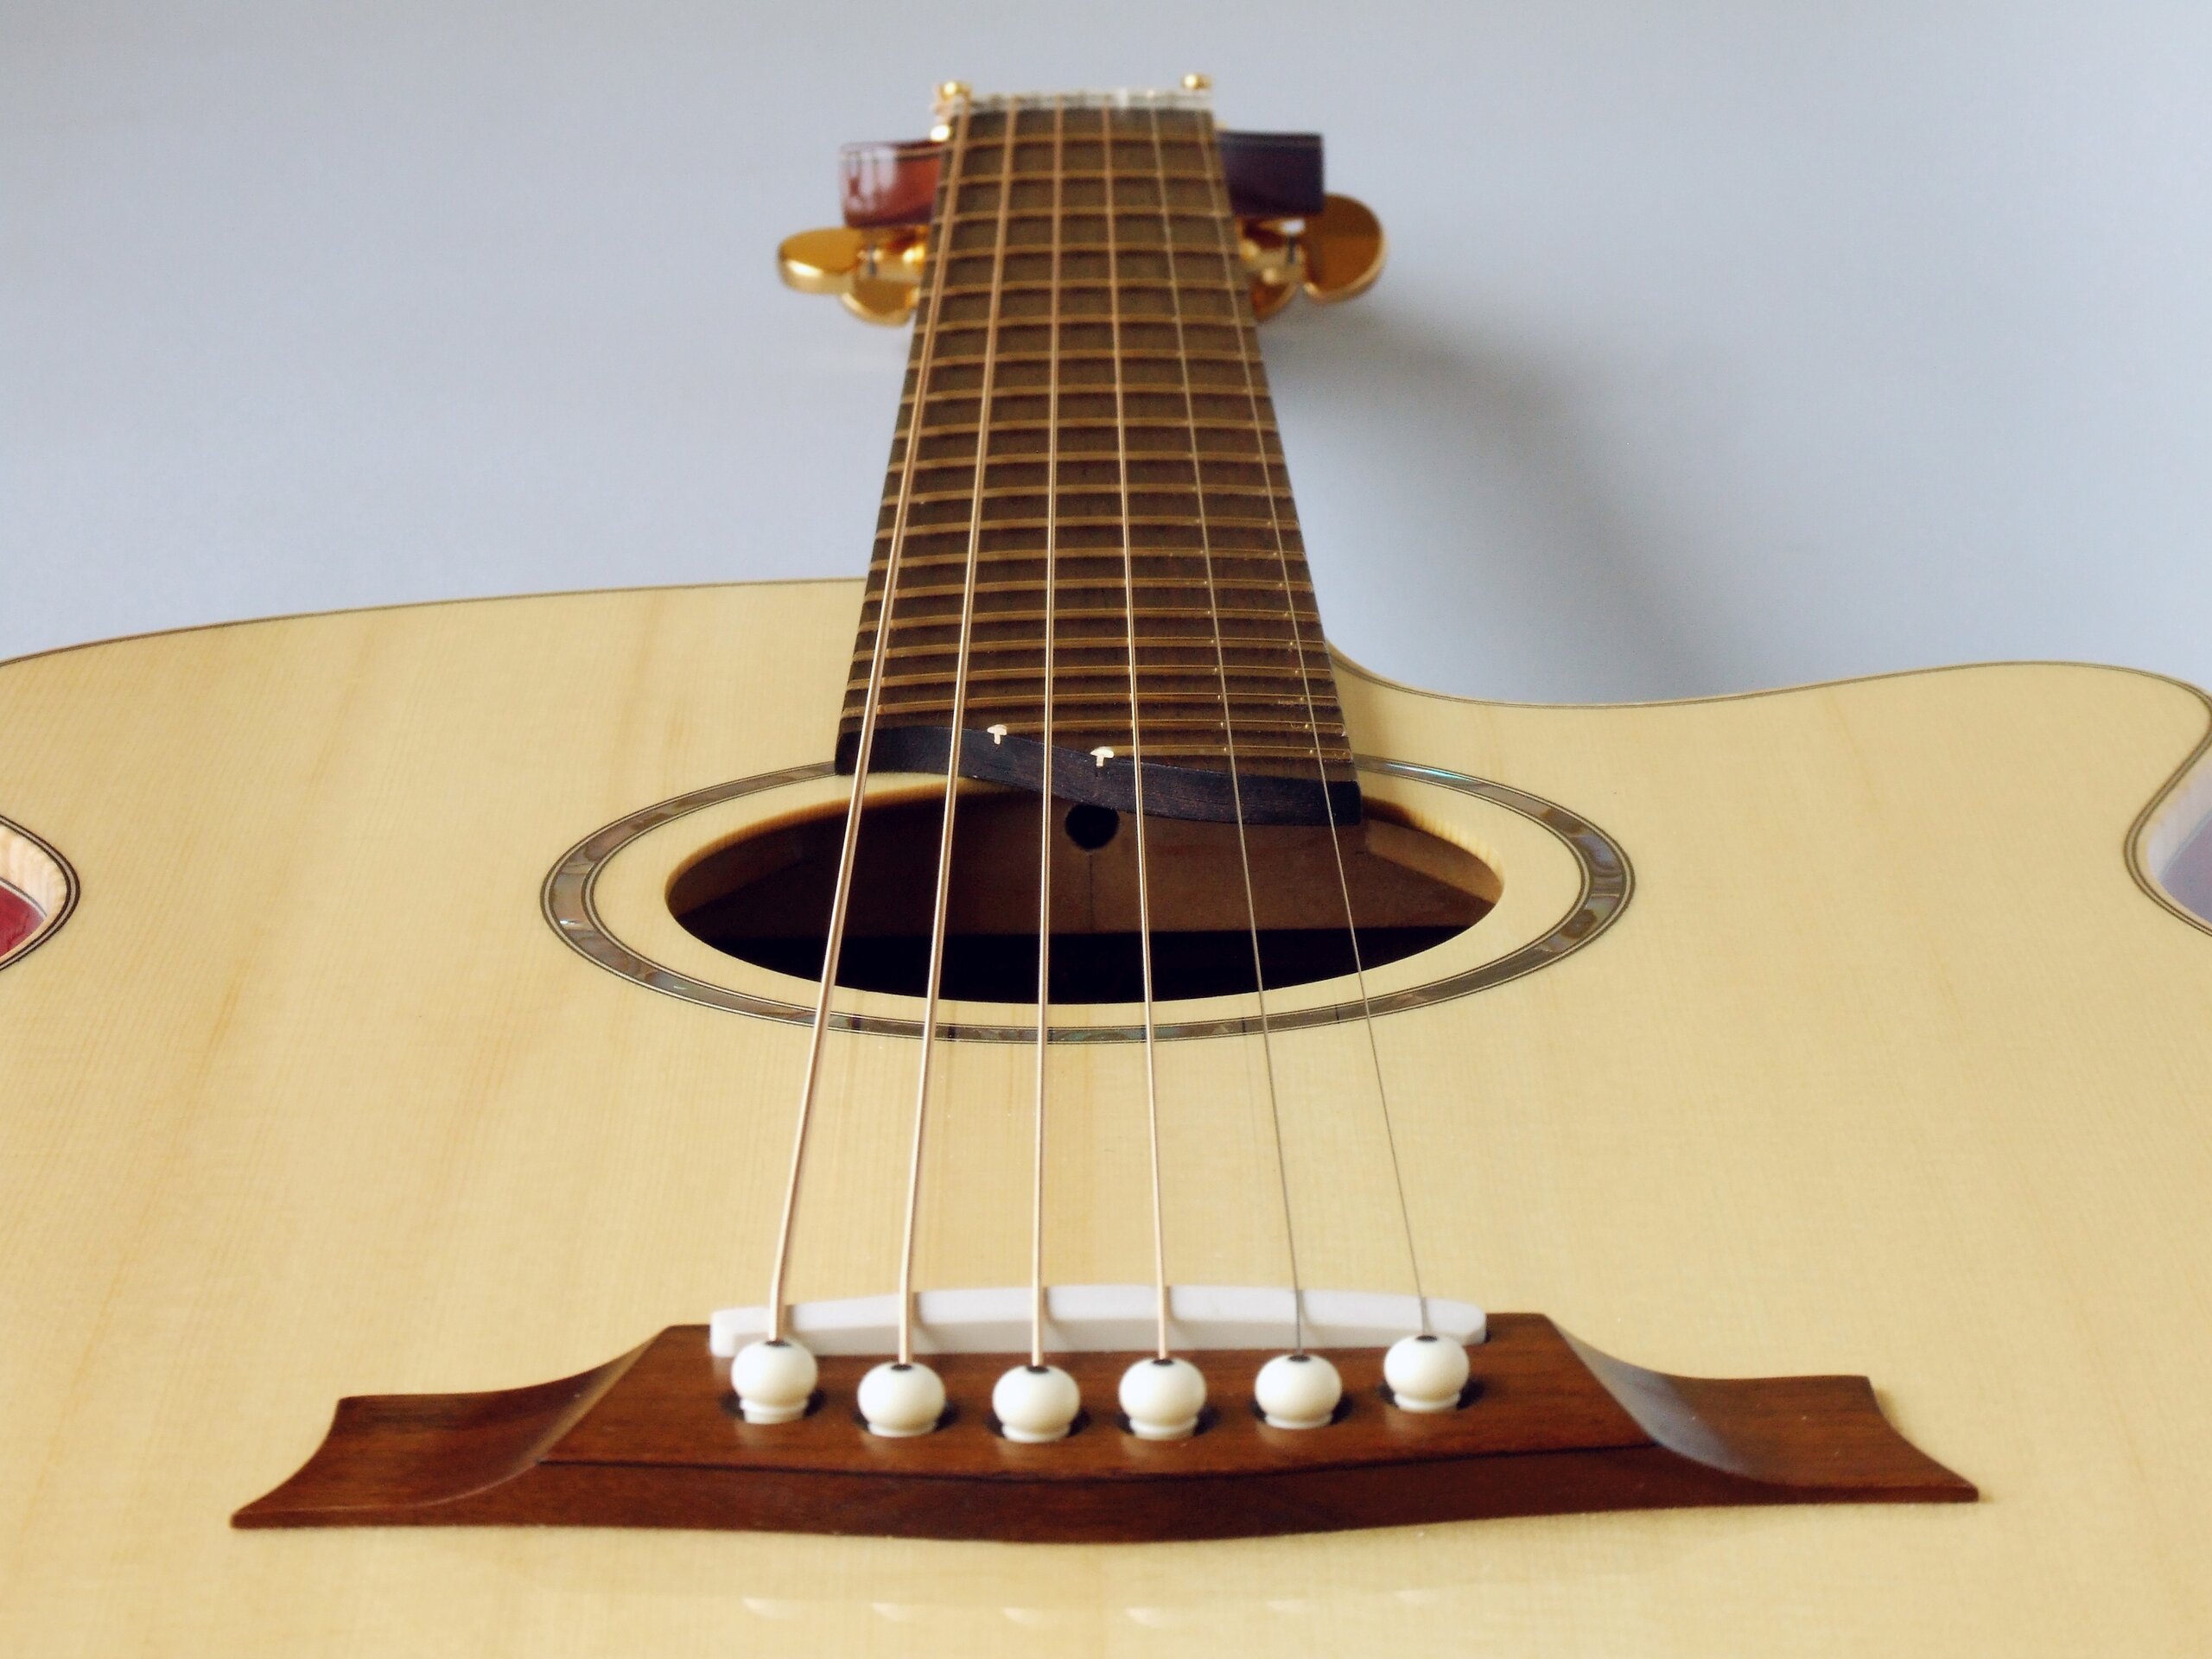 View from the bridge of a spruce top steel string guitar